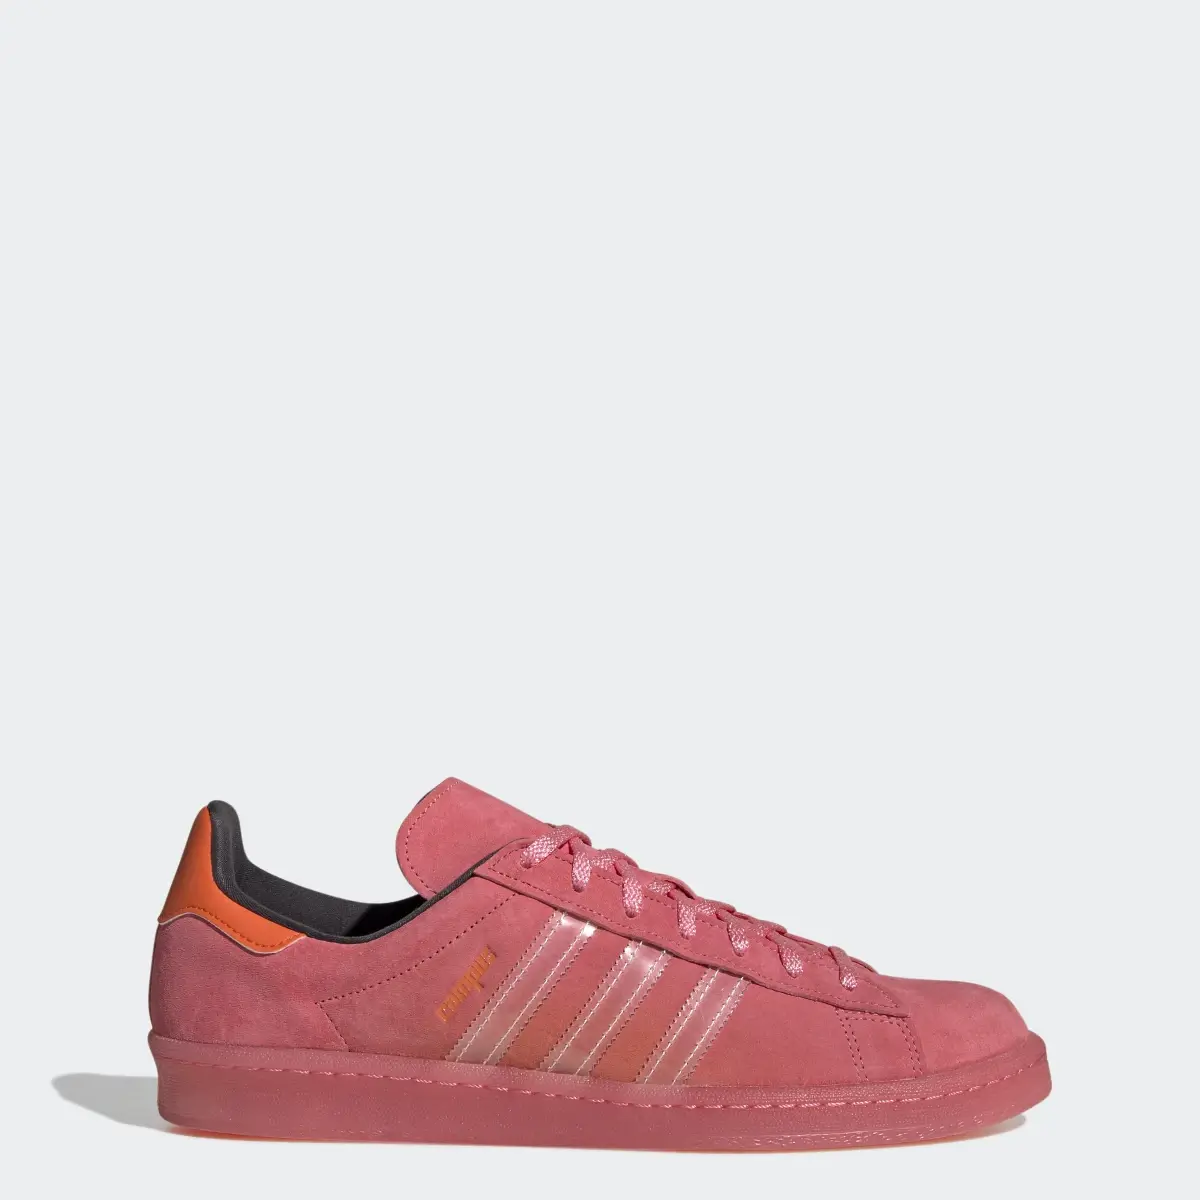 Adidas Campus 80s Shoes. 1